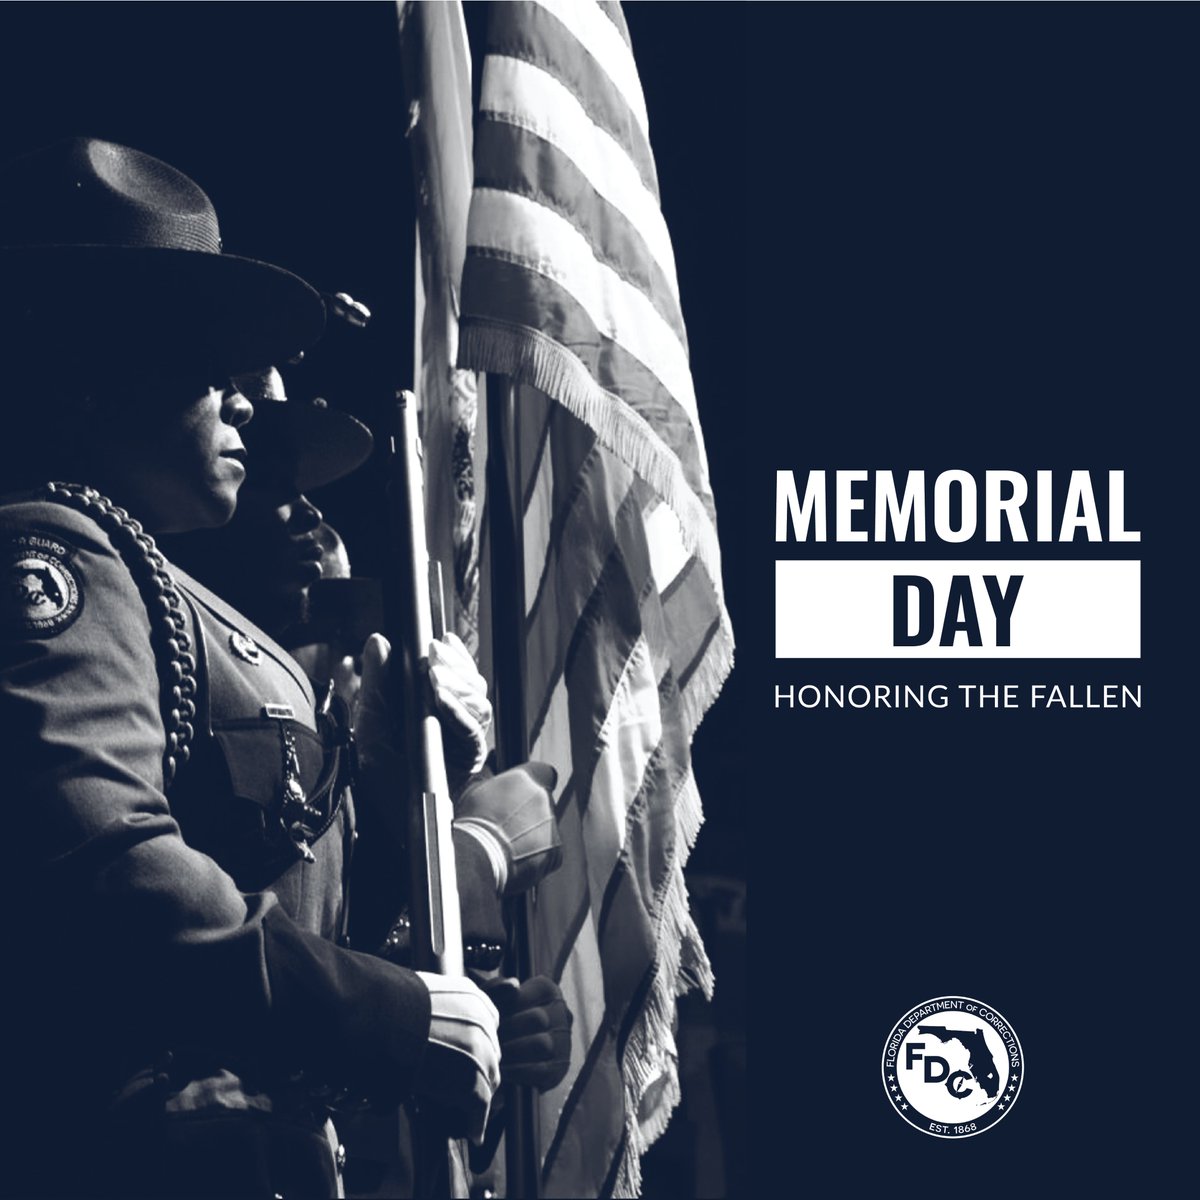 We honor the courageous men and women who gave their lives in defense of our freedom on this Memorial Day. May their legacy go on and their bravery never be forgotten.